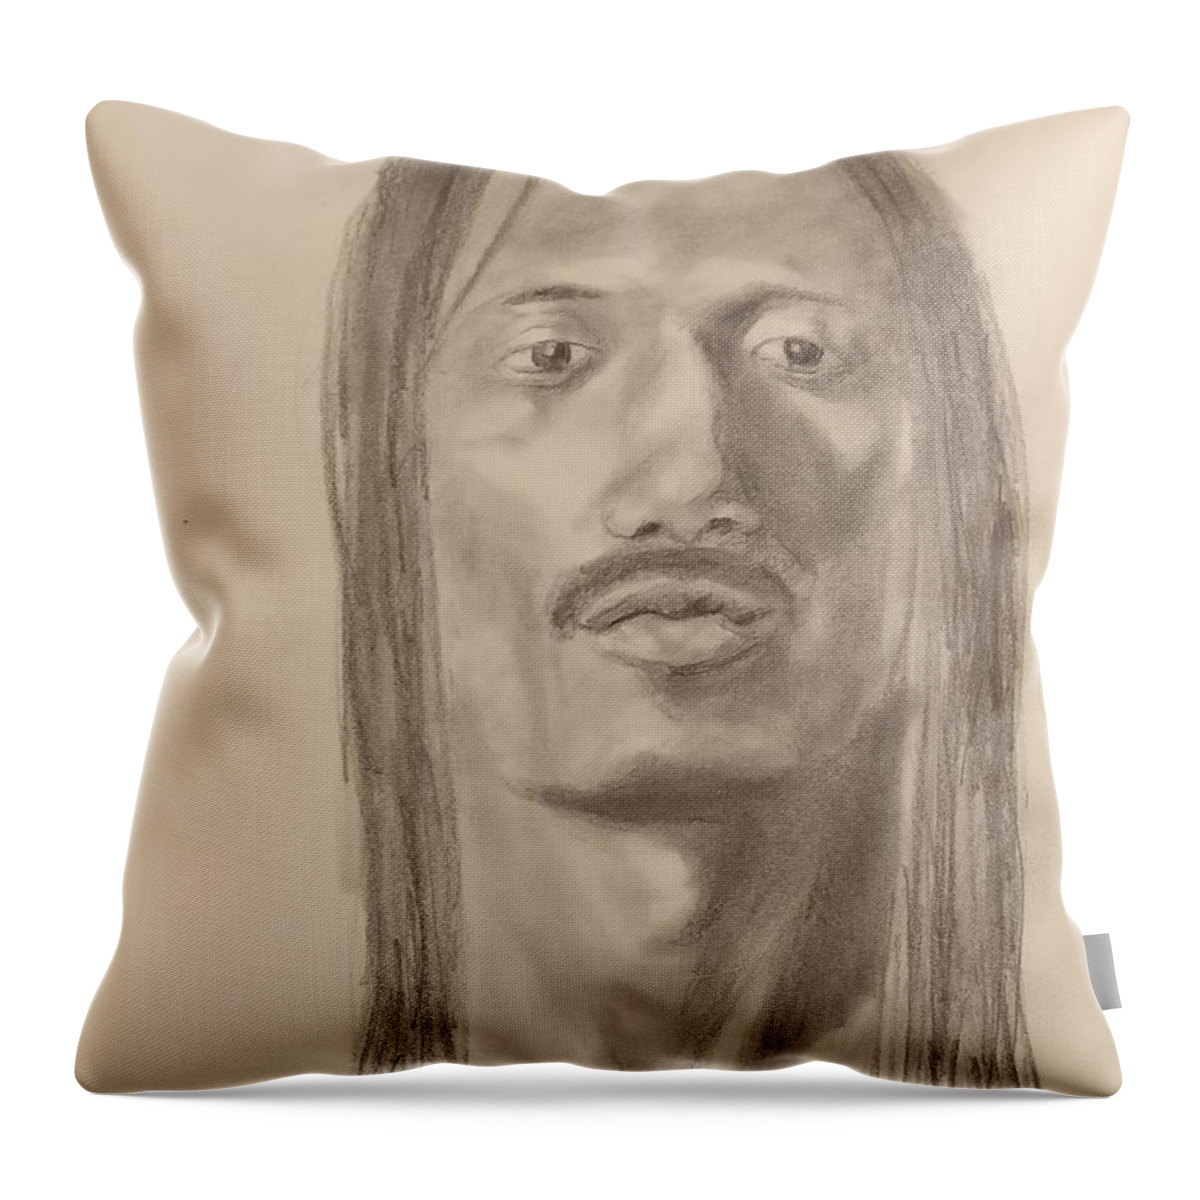 Sketch Throw Pillow featuring the drawing Long Hair Style by Nicolas Bouteneff